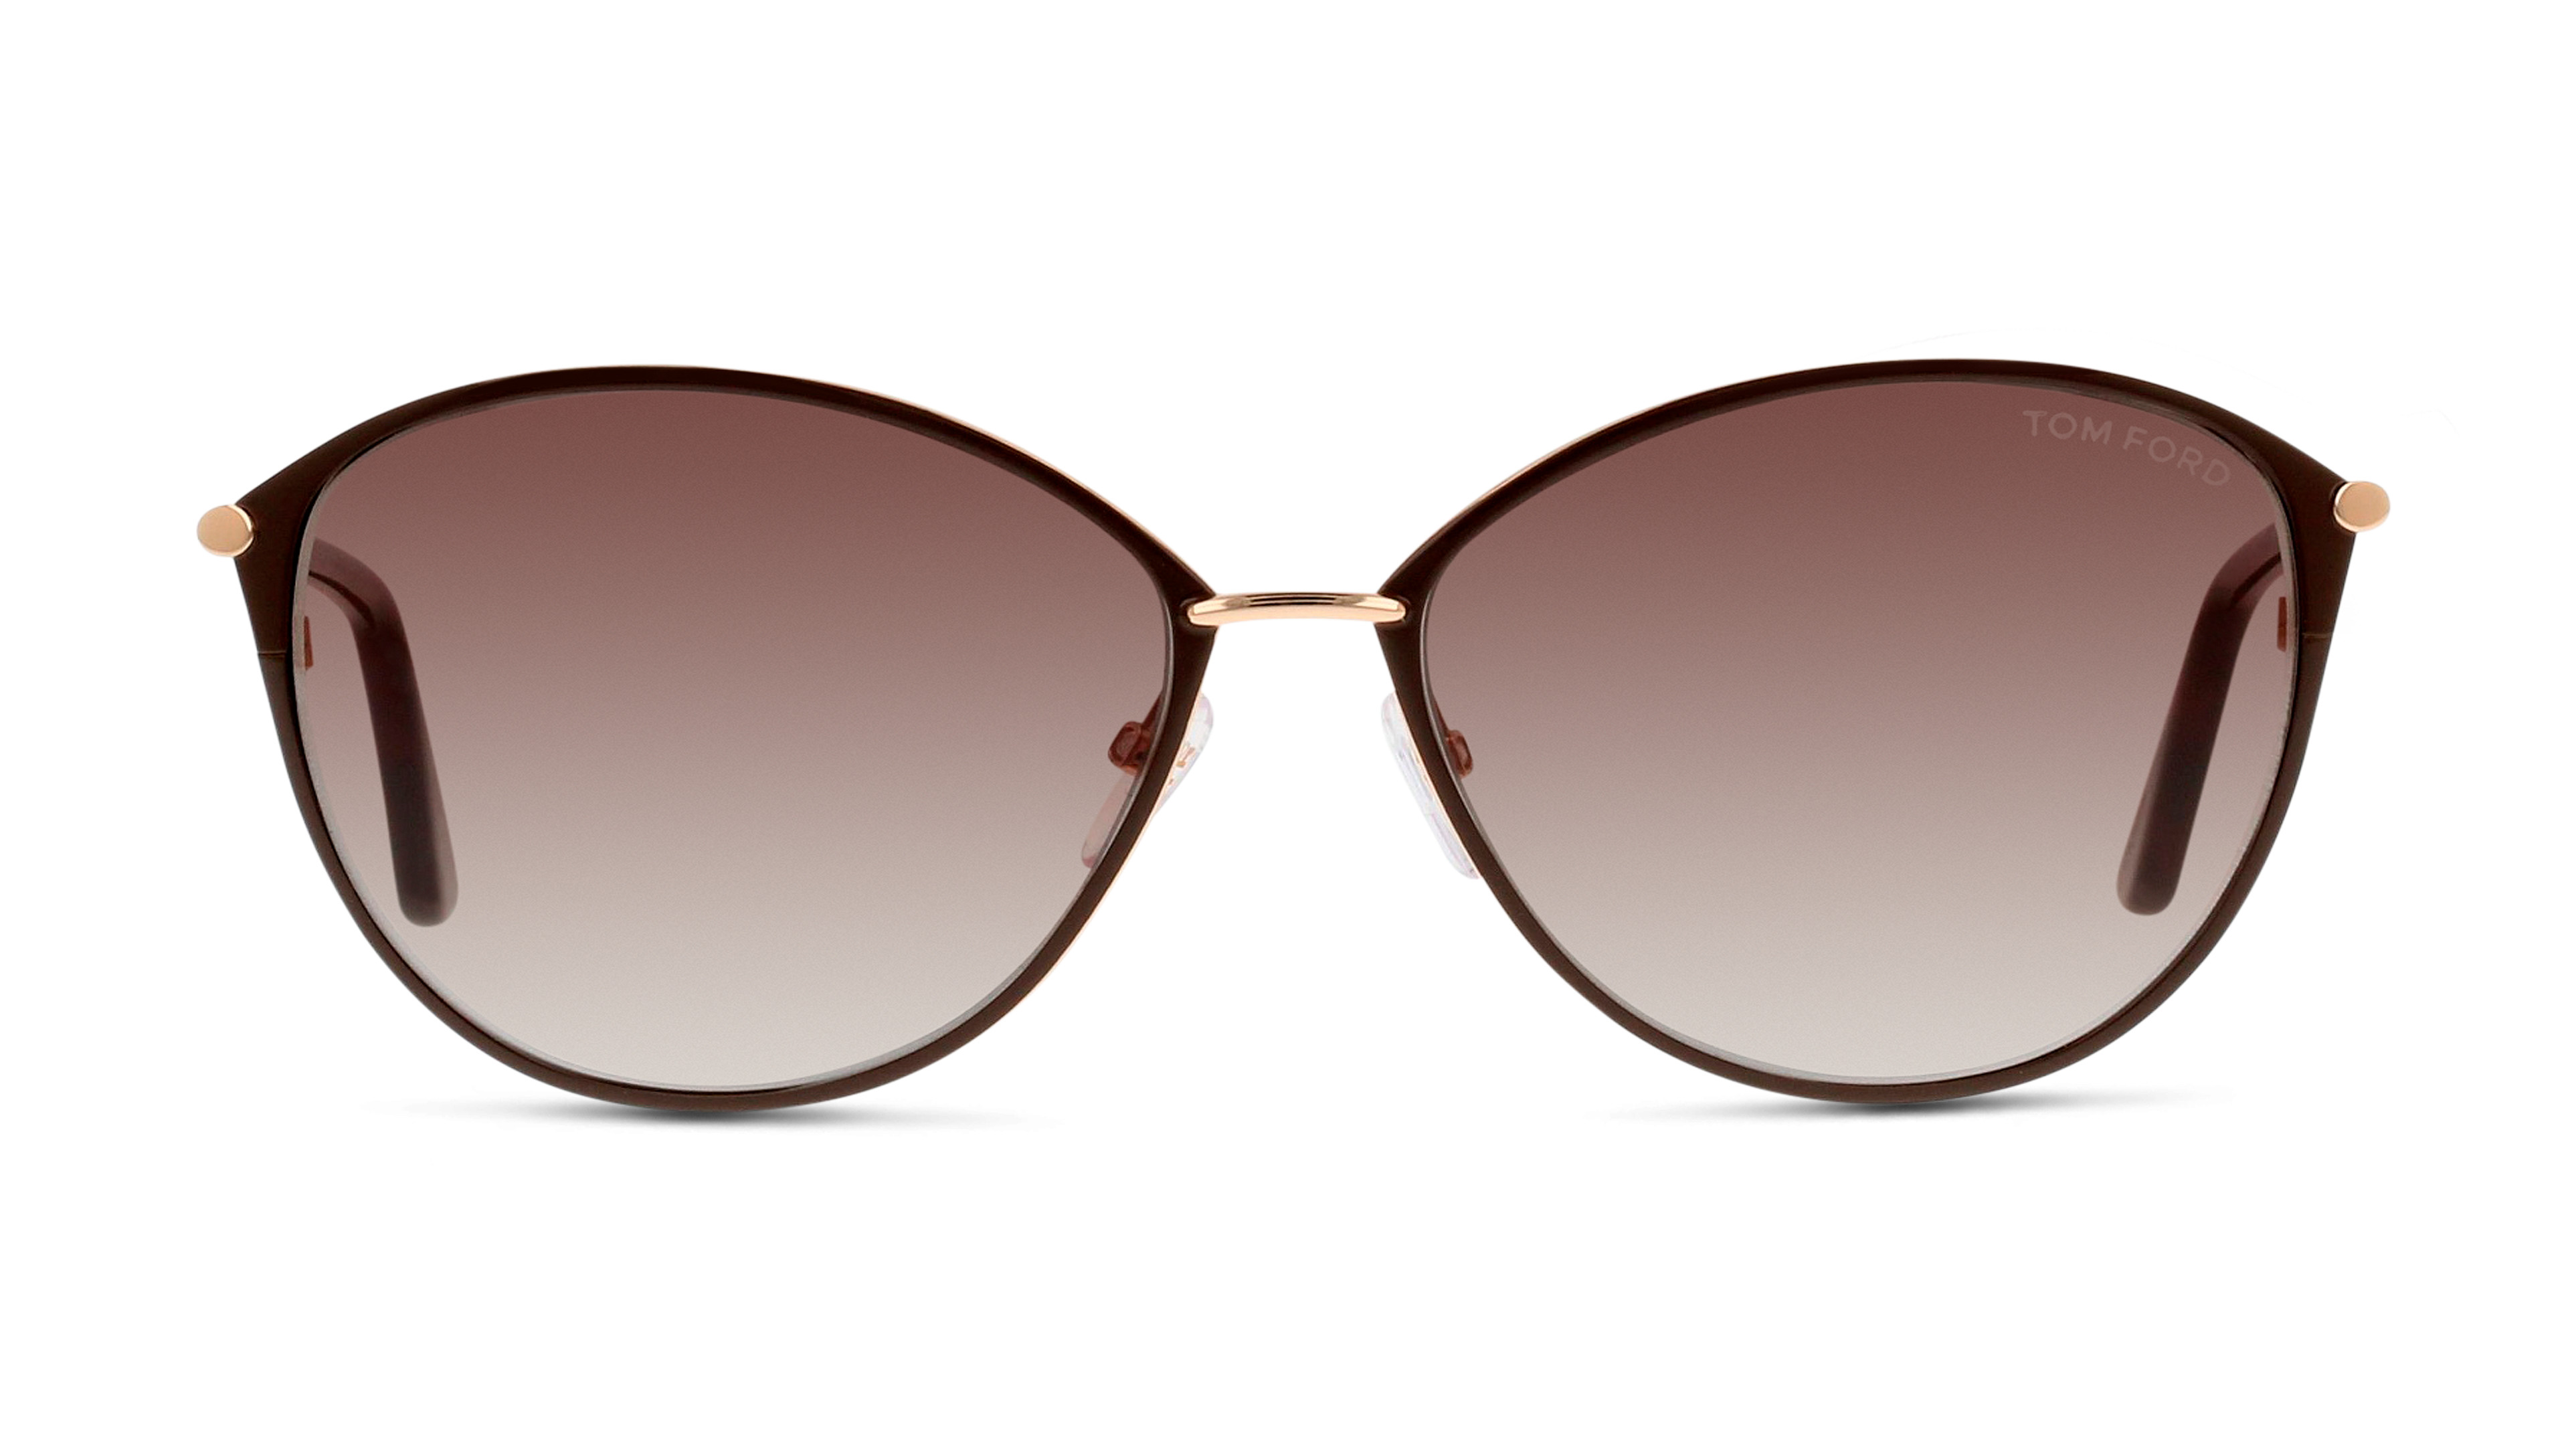 [products.image.front] Tom Ford PENELOPE FT0320 28F Sonnenbrille